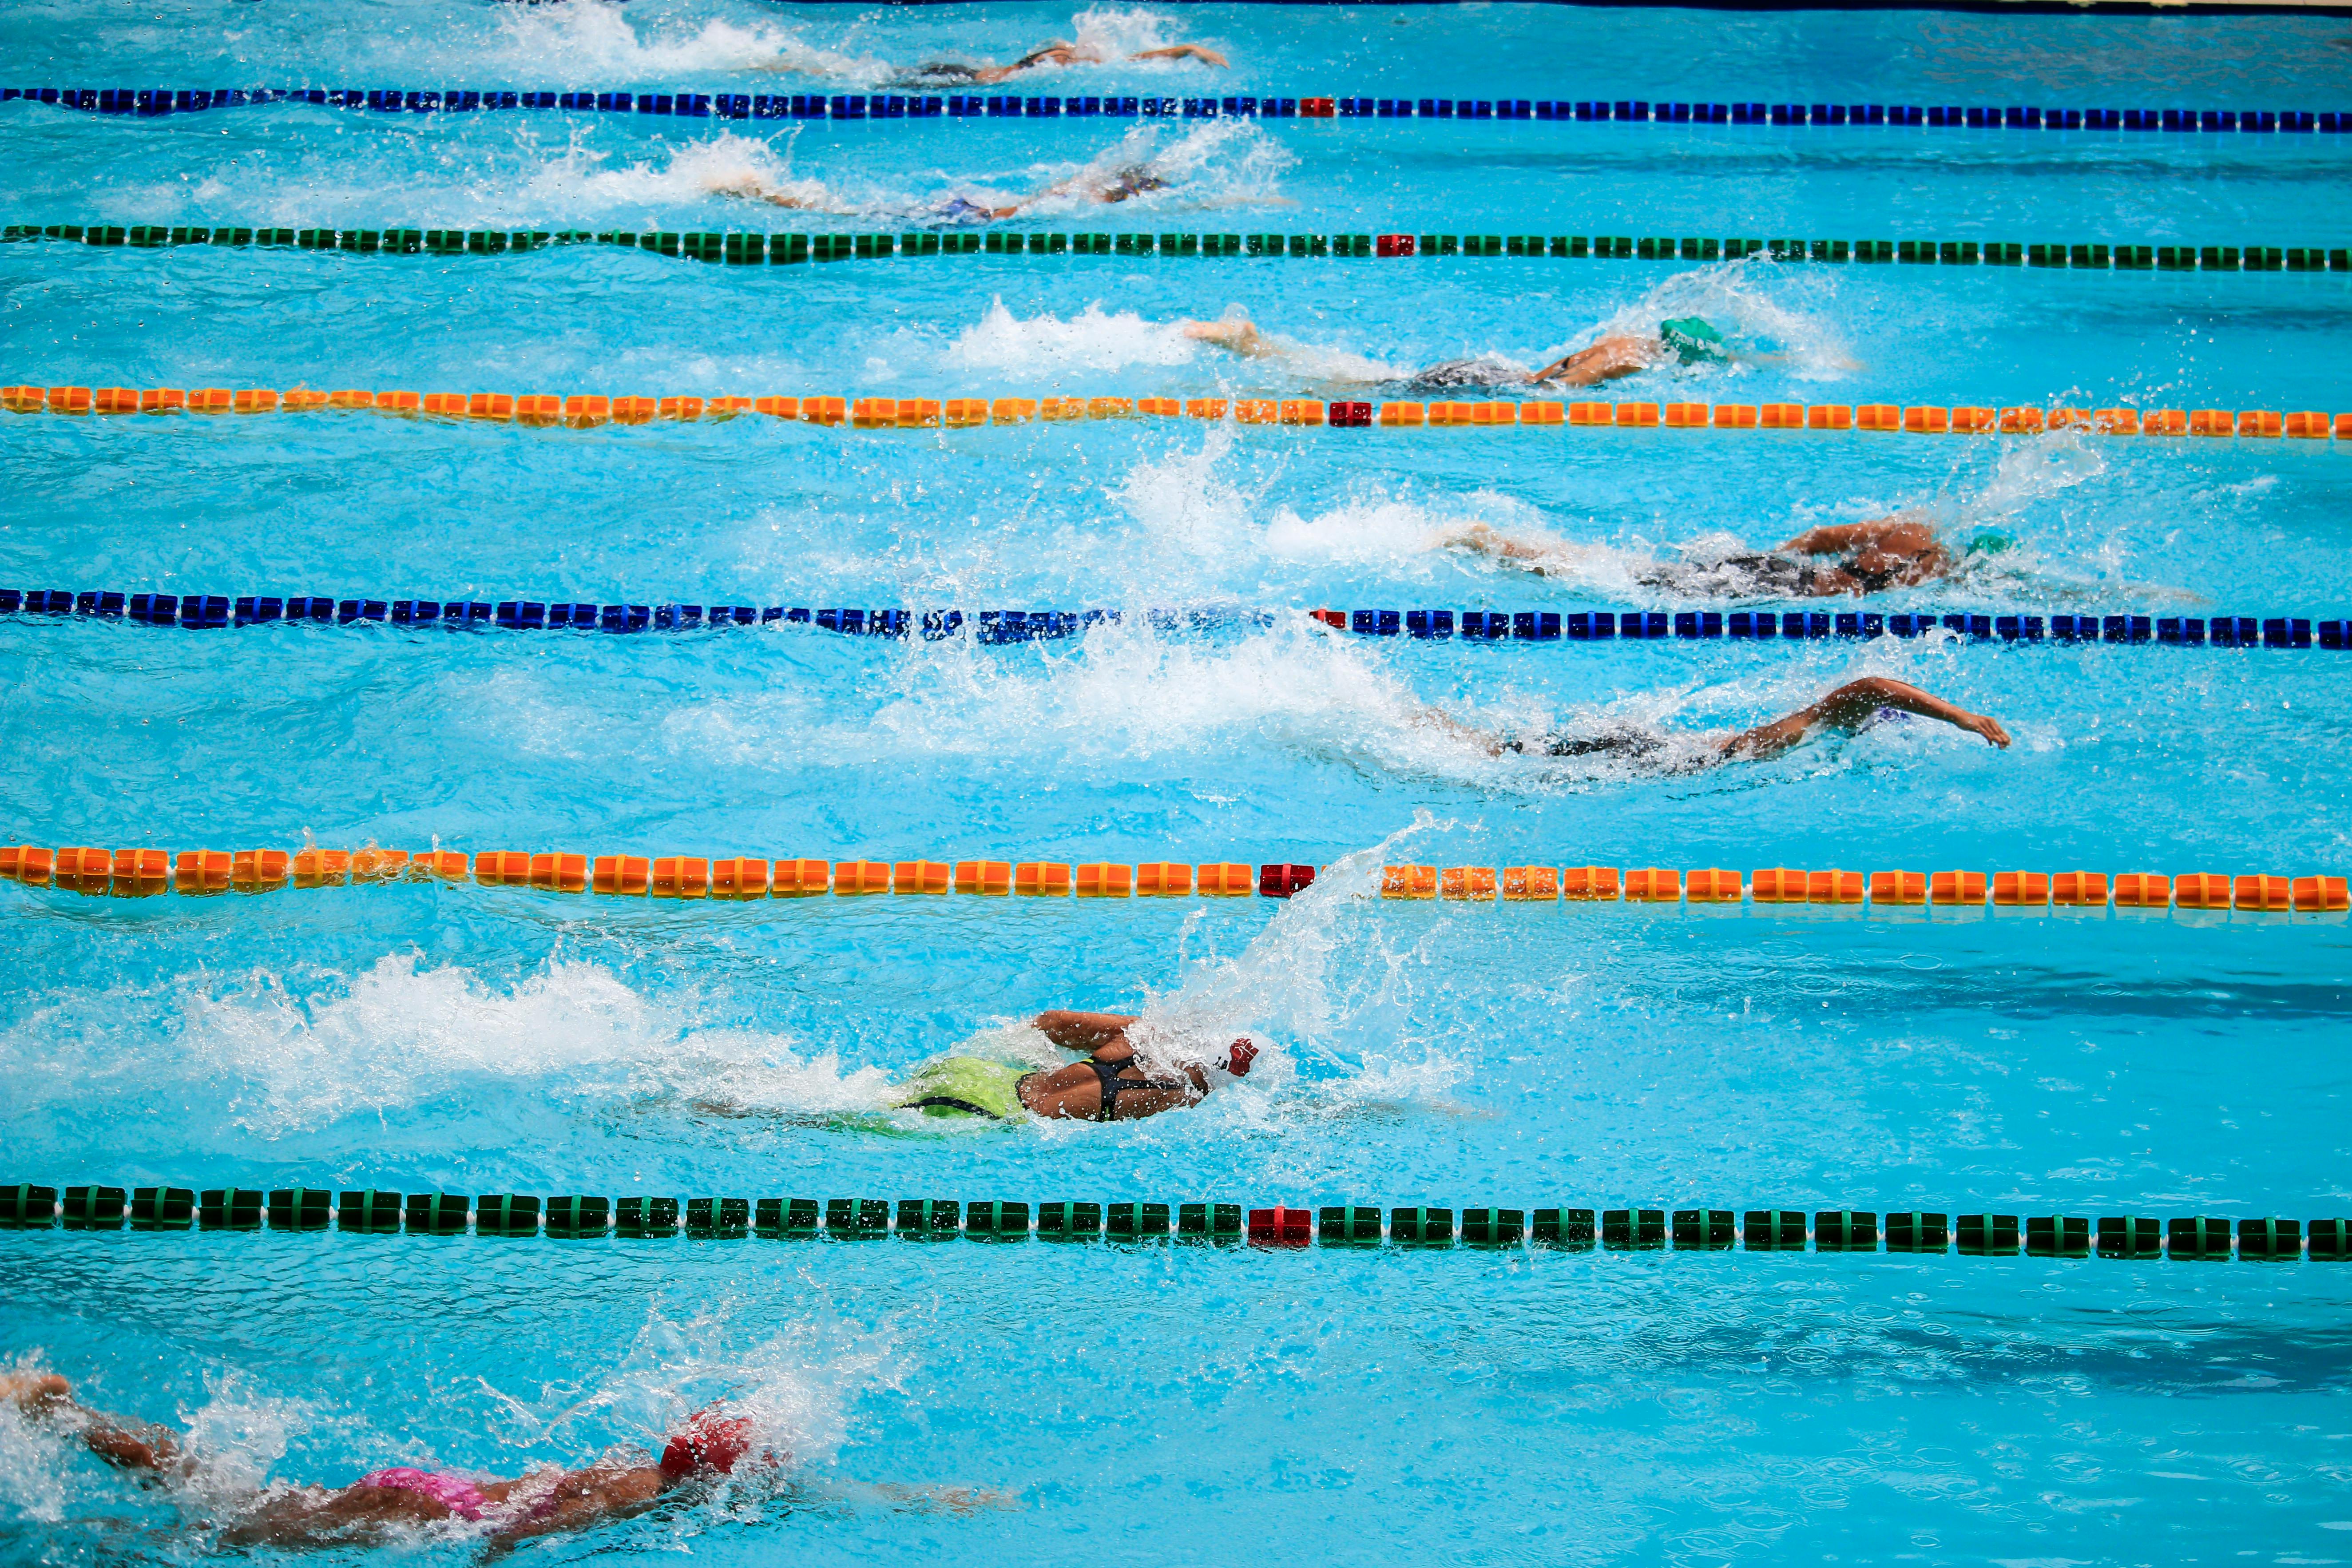 Swimmers in a race.